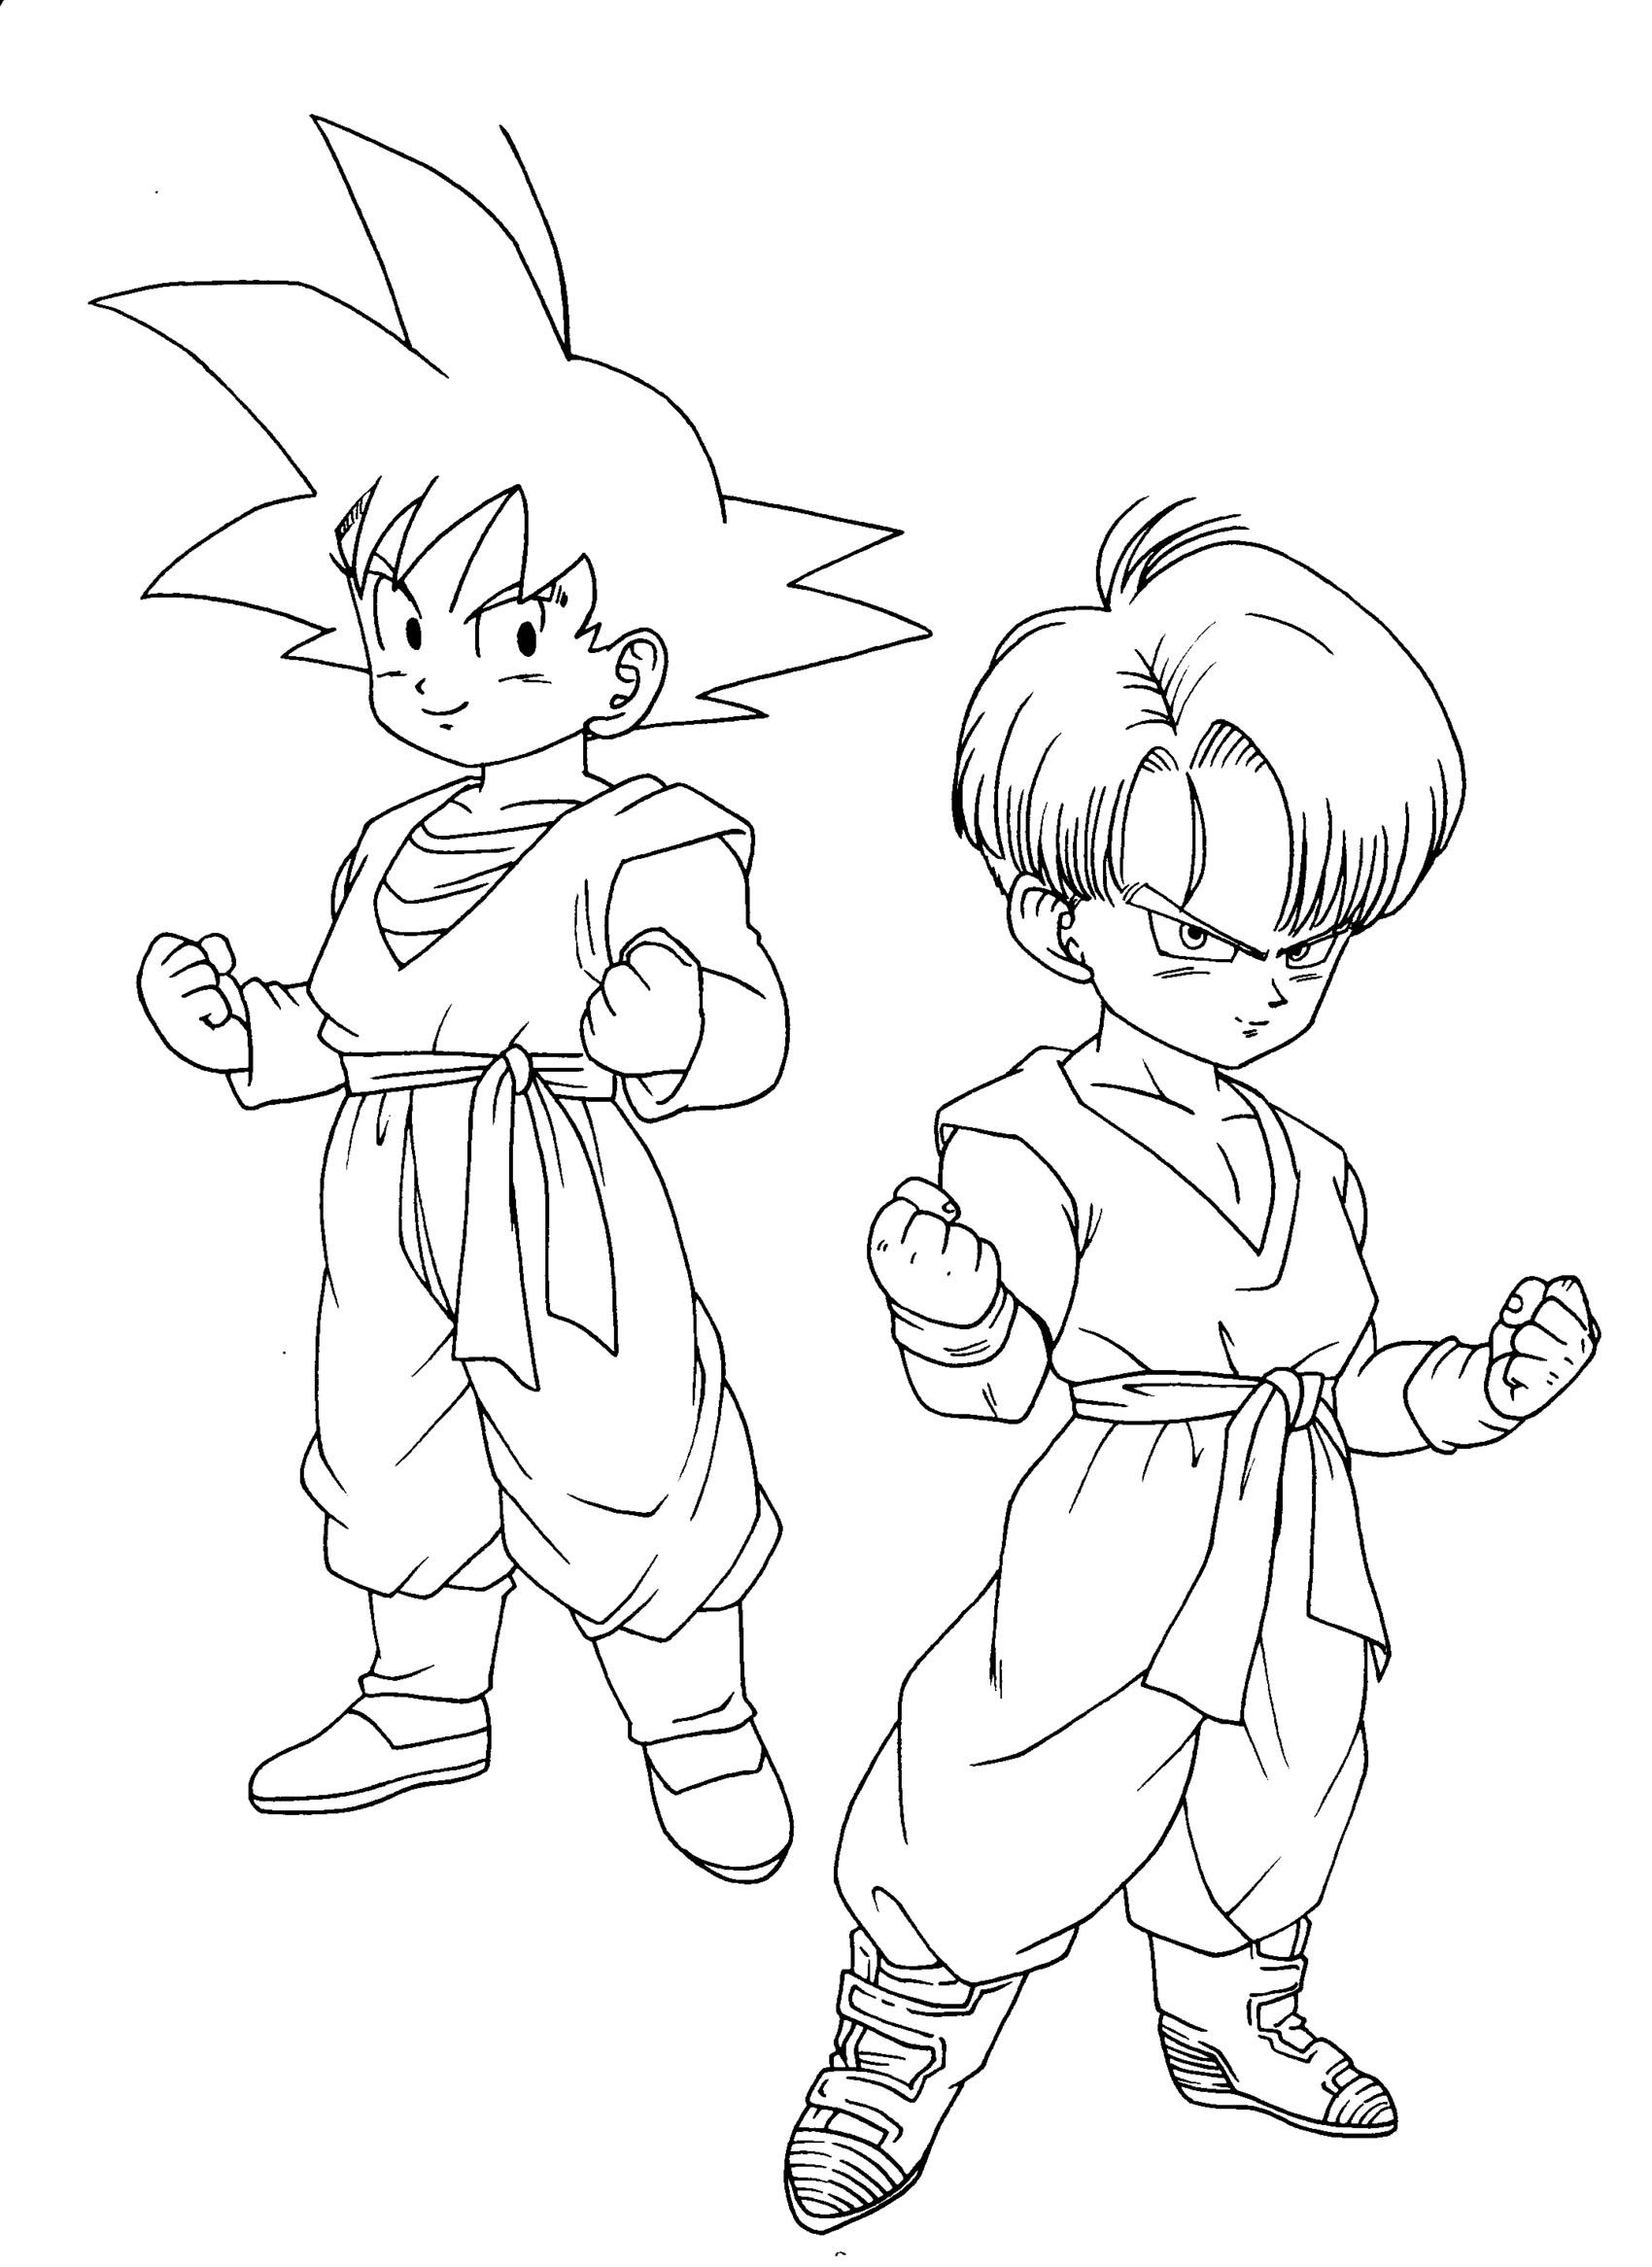 Songoten Trunks - Dragon Ball Z Kids Coloring Pages